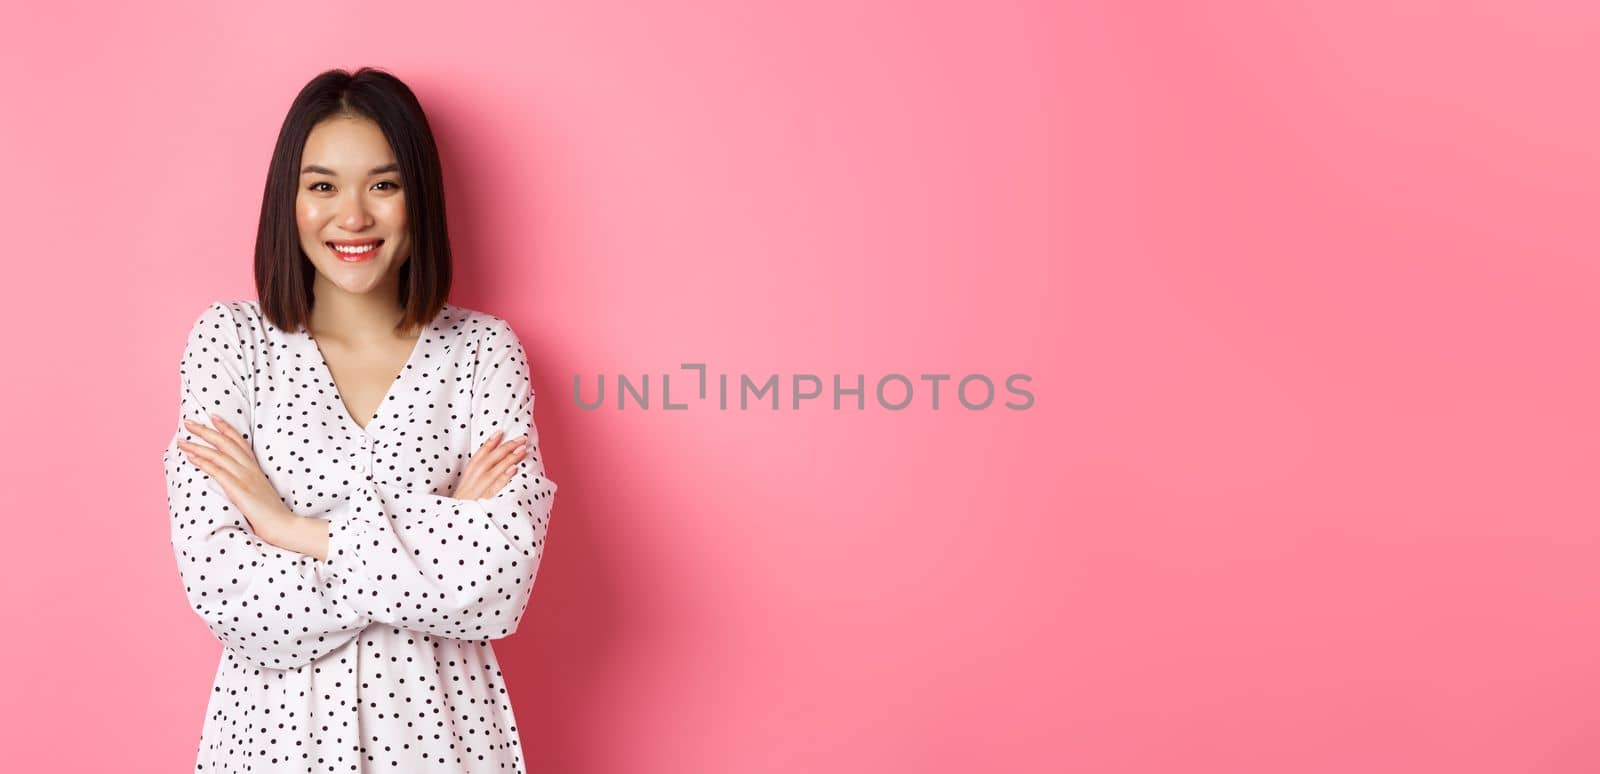 Pretty young asian woman in spring dress smiling, cross arms on chest and looking confident, standing over pink background.